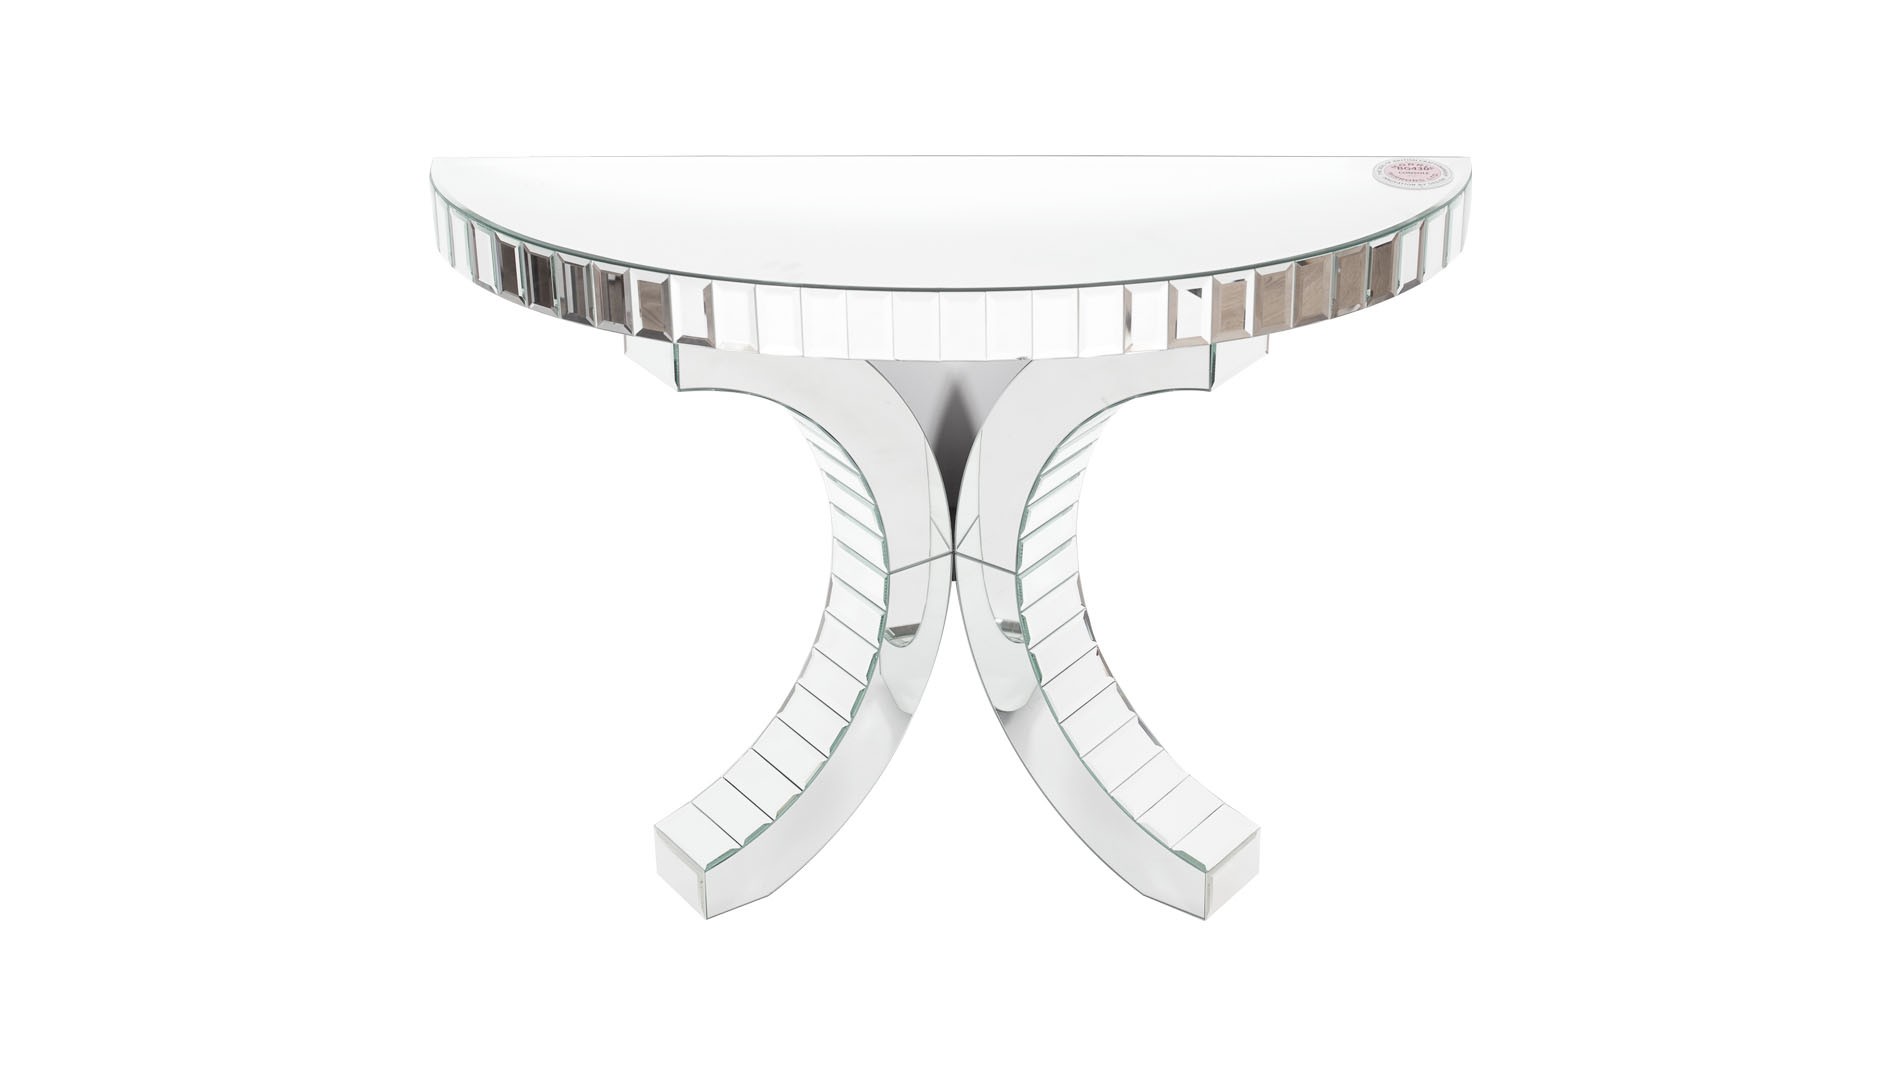 furniture mesmerizing half moon accent table with elegant looks winsome gorgeous mirrored tables ikea and ideas wall mounted demilune entry oval console white blue patio side